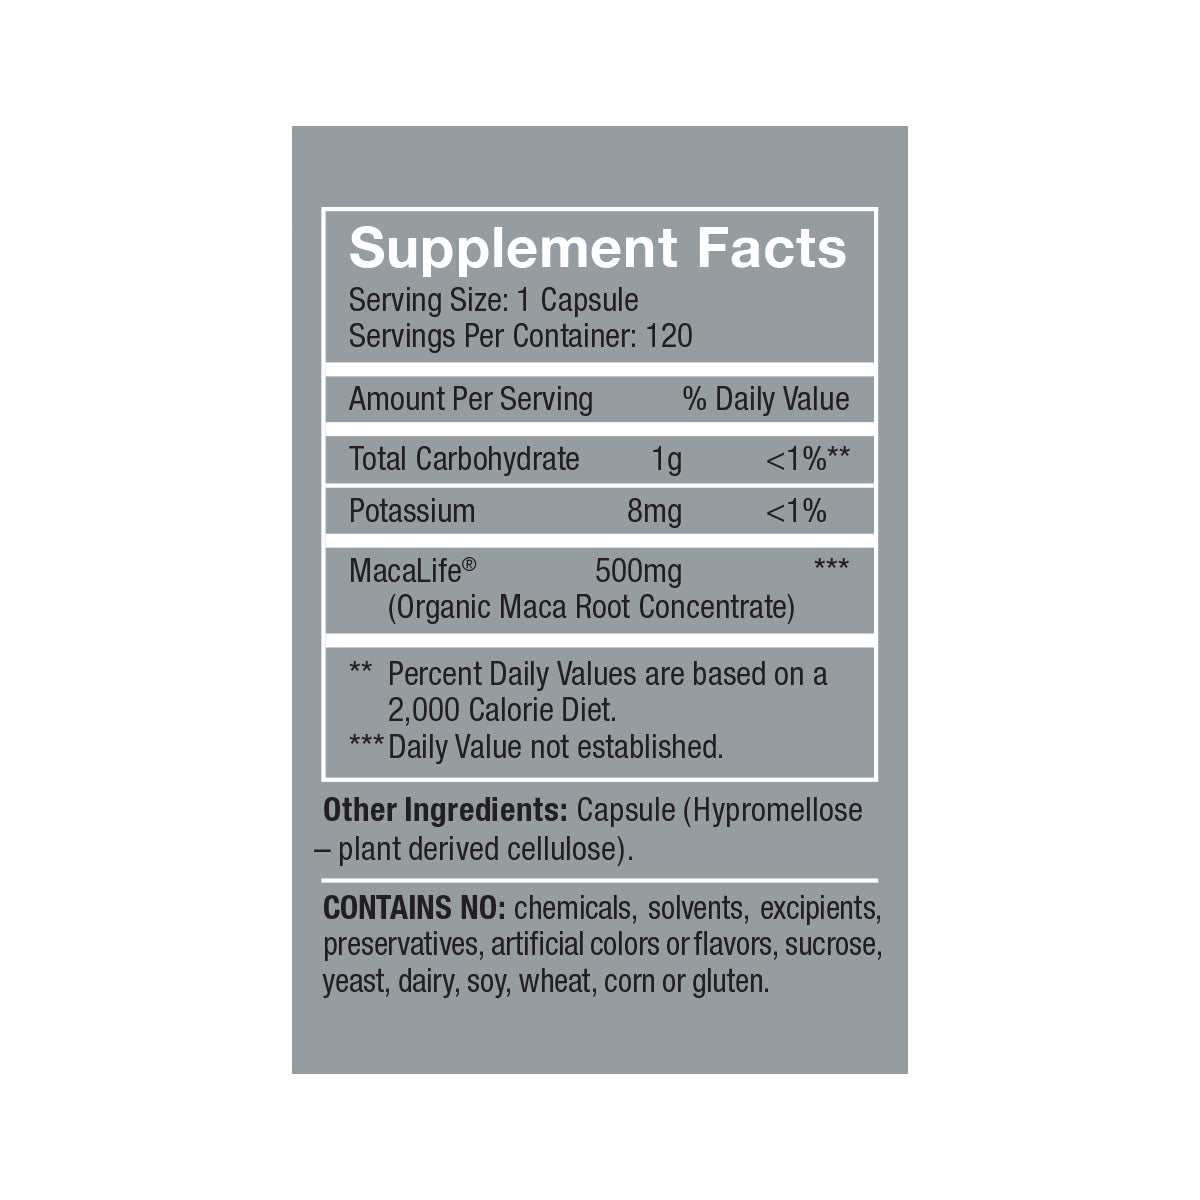 Femmenessence MacaLife<br>For Perimenopause Supplement Facts: Serving Size: 1 capsules, Servings per container: 120, Amount Per Serving % daily value, Total Carbohydrate 1g <1%**, Potassium 8mg <1%, MacLife® (Organic Maca Root Concentrate) 500mg ***, other ingredient: capsule (hypromellose—plant derived cellulose), contains no chemicals, solvents, excipients, preservatives, artificial colors or flavors, sucrose, yeast, dairy, soy, wheat, corn, or gluten